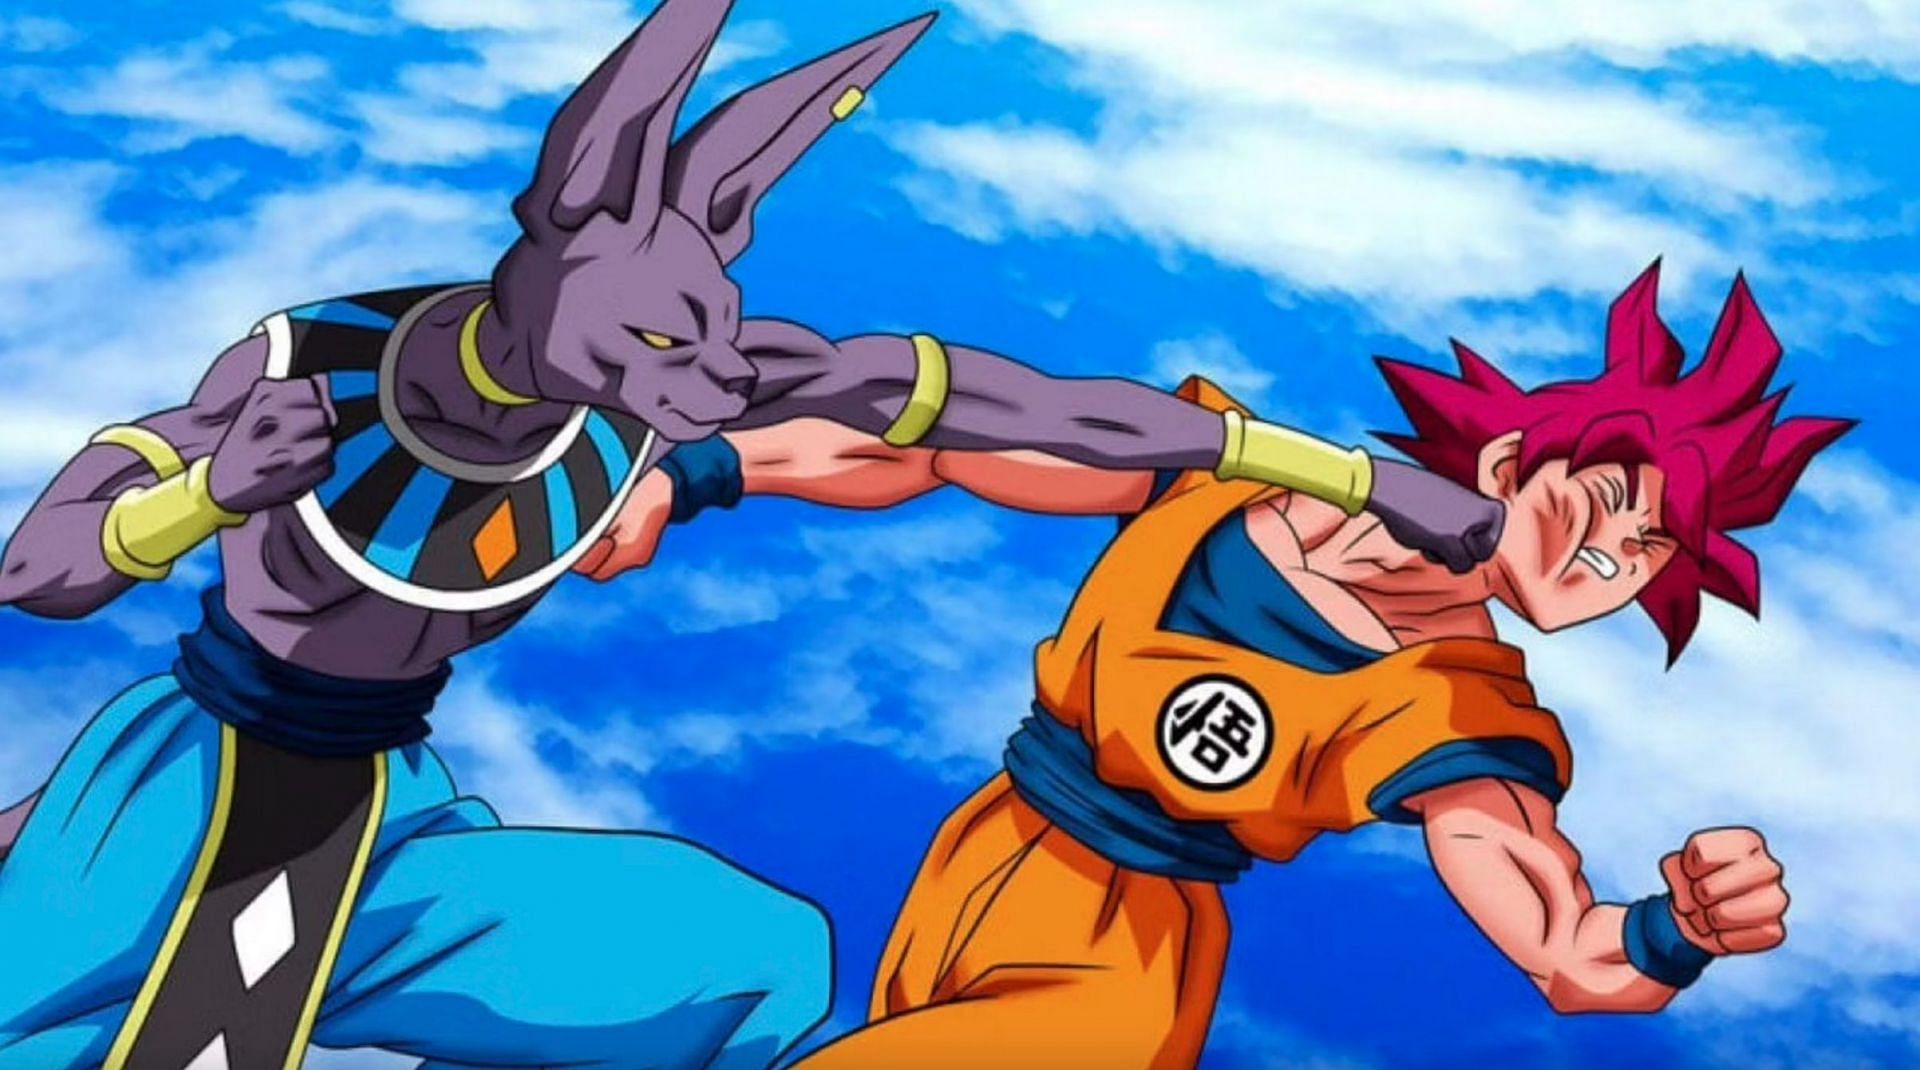 Beerus from the anime (image via Toei Animation)